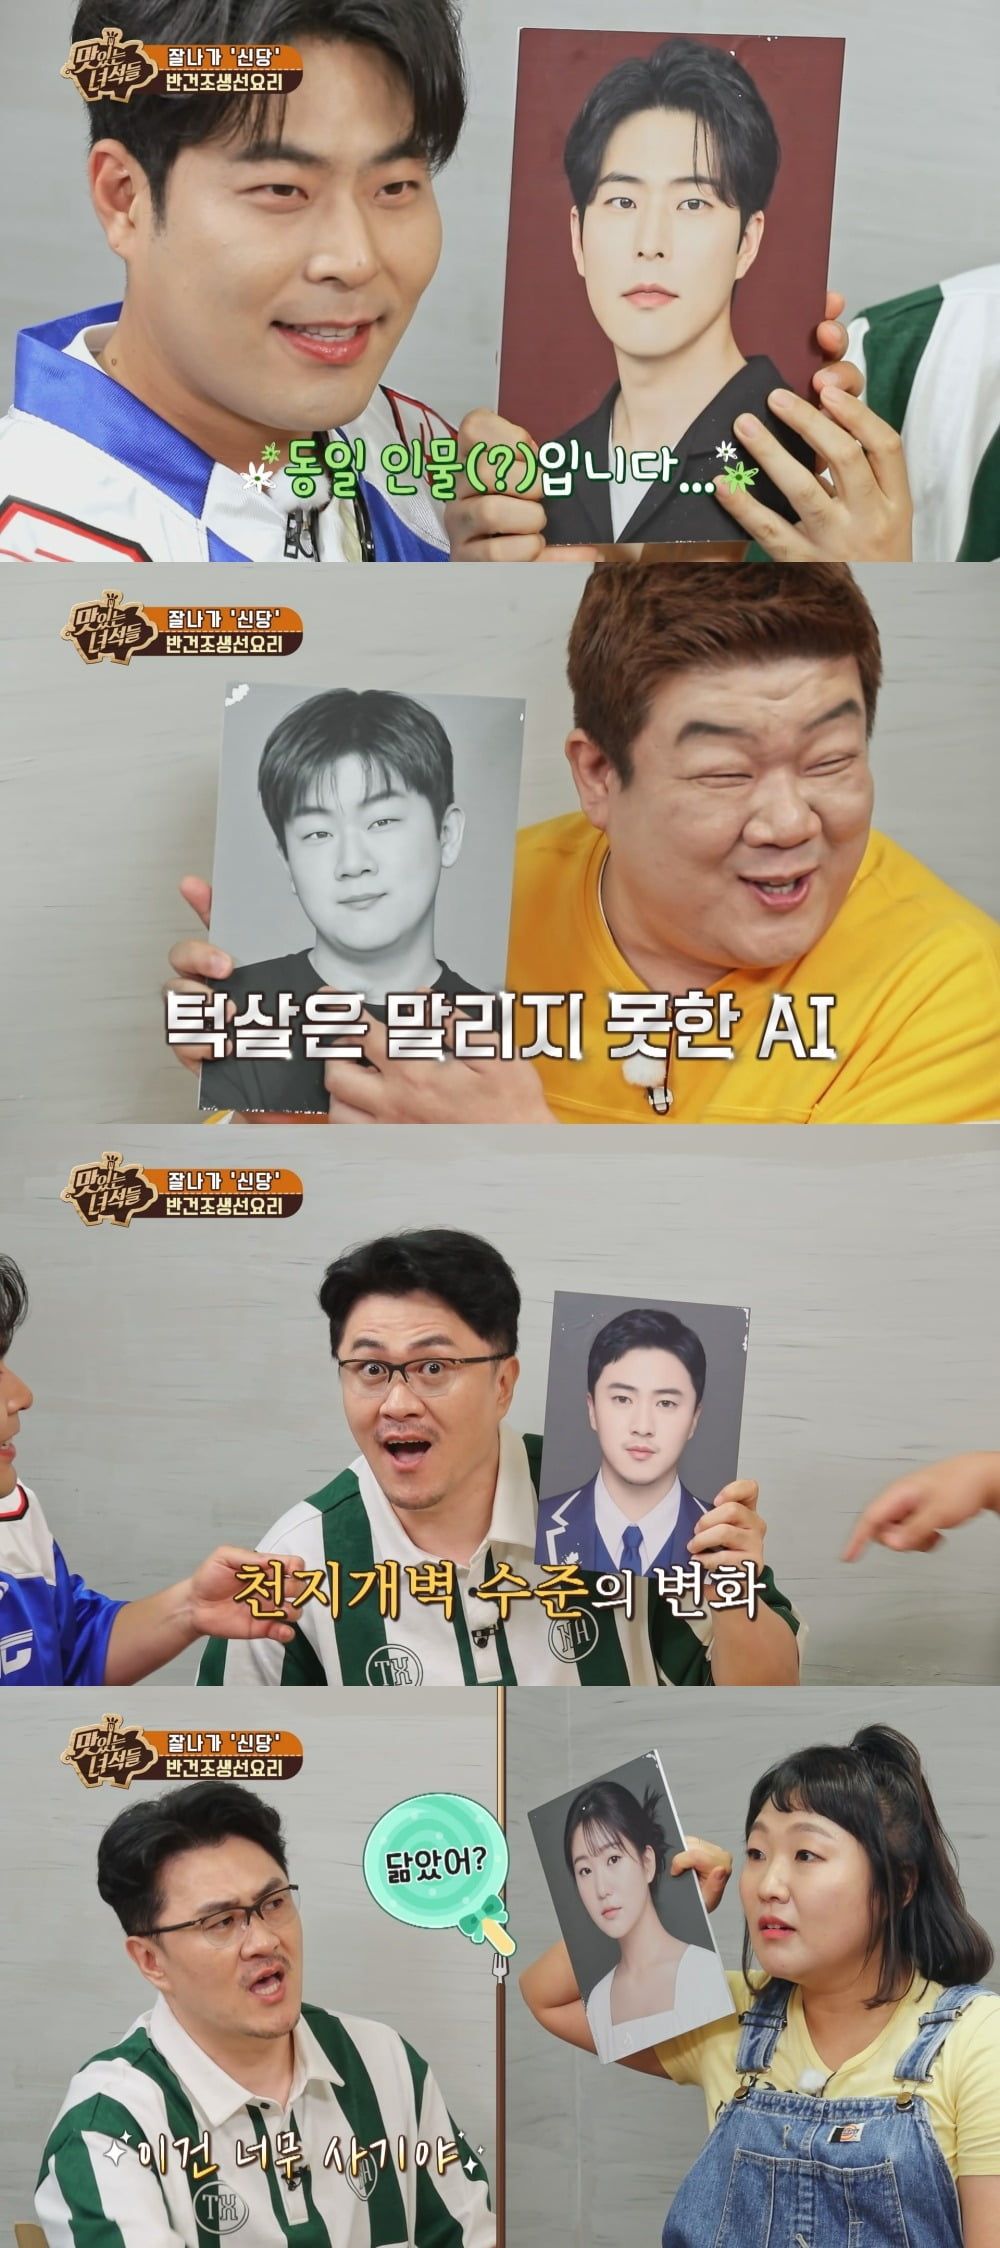 Comedian Yu Min-sang, the chin that even AI can't handle